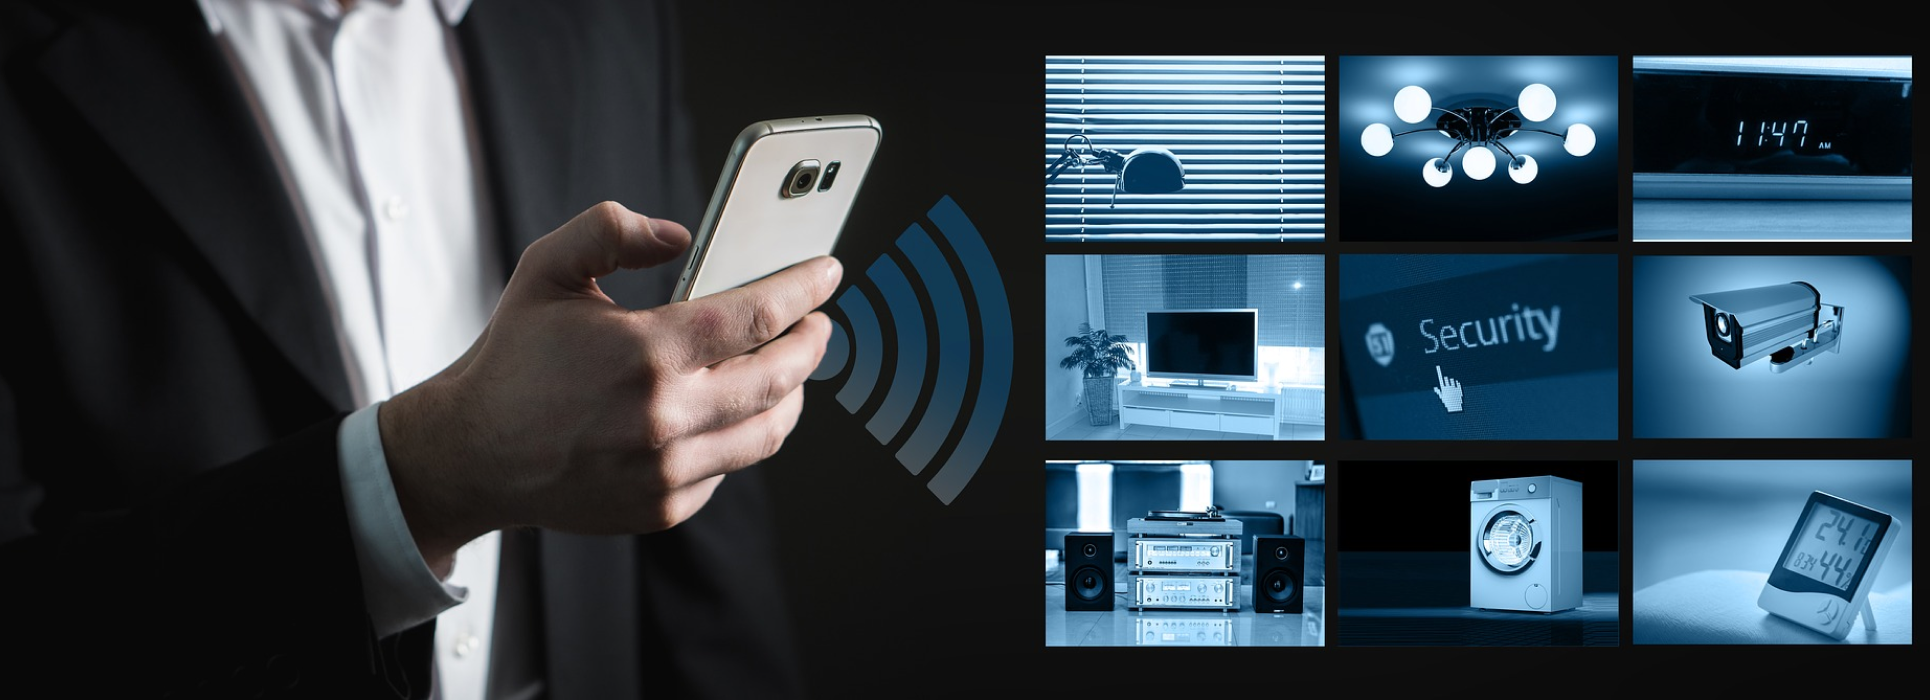 Build A Simple Smart Home With Diy Home Automation Systems In 2022!